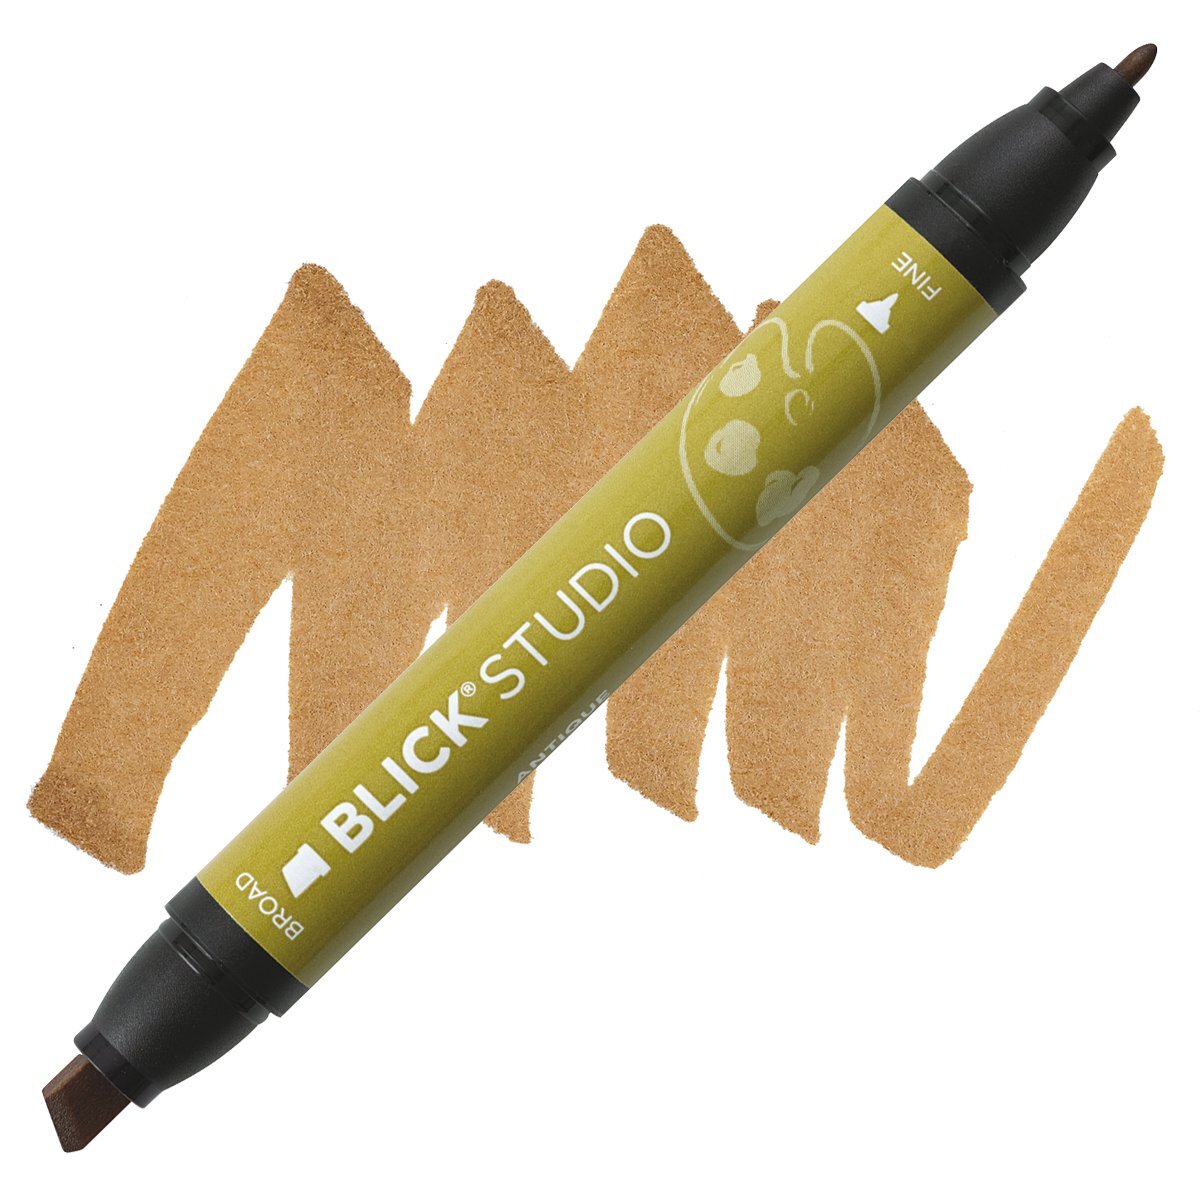 First Look Blick Illustrator Markers 